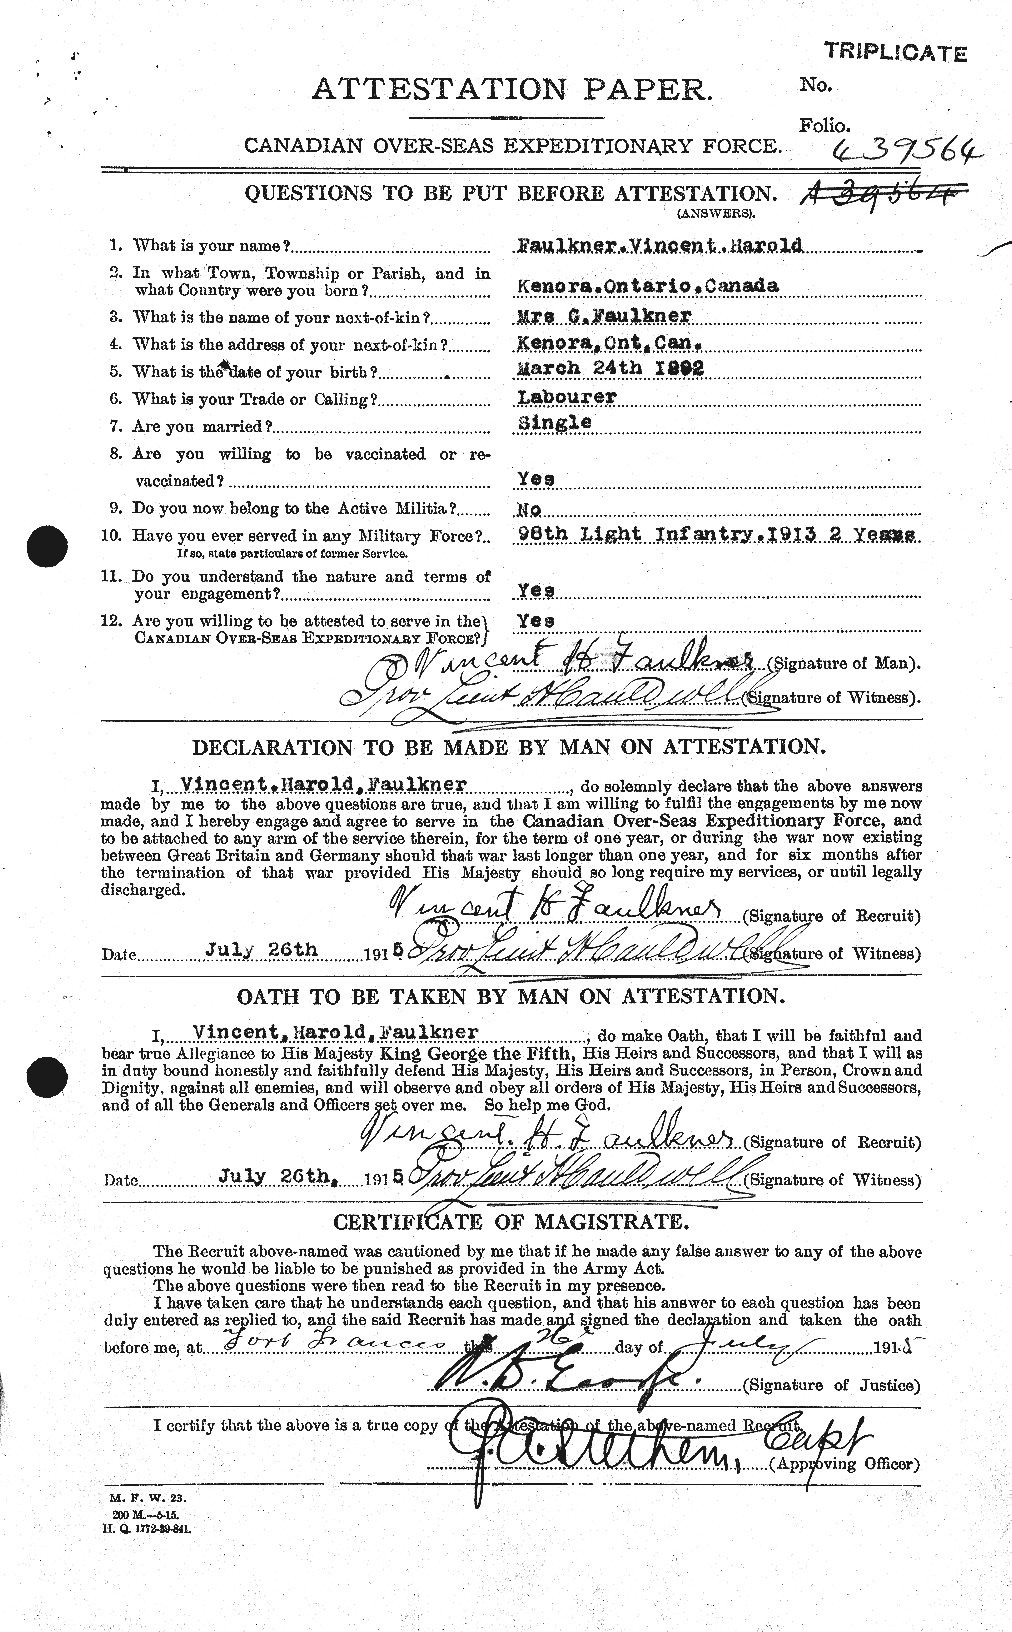 Personnel Records of the First World War - CEF 321315a